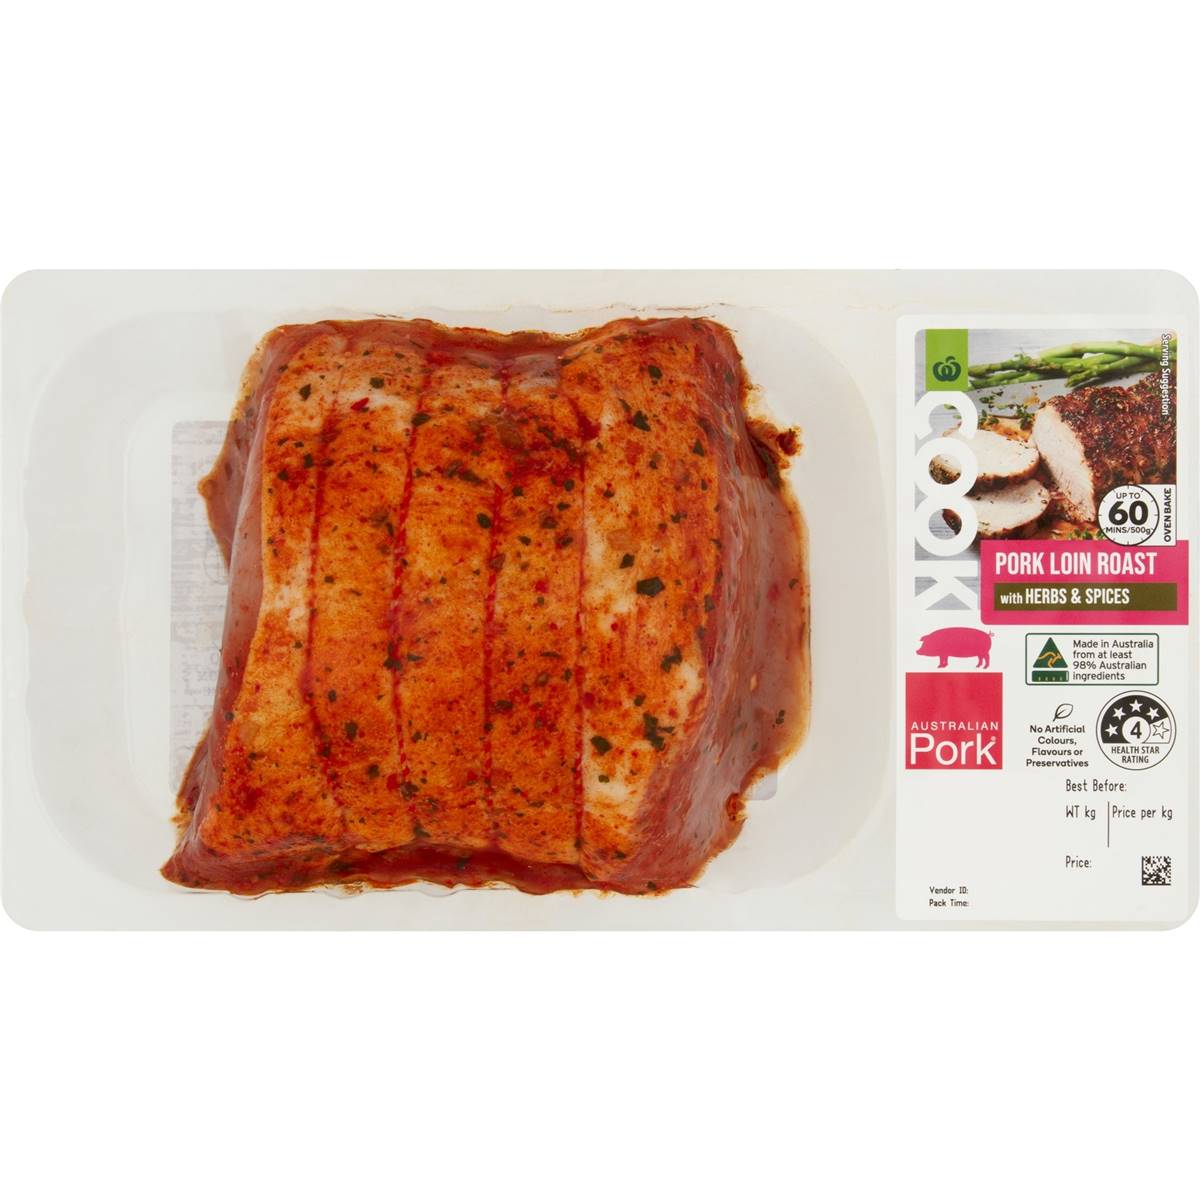 Calories in Woolworths Cook Pork Loin Roast With Herbs & Spices